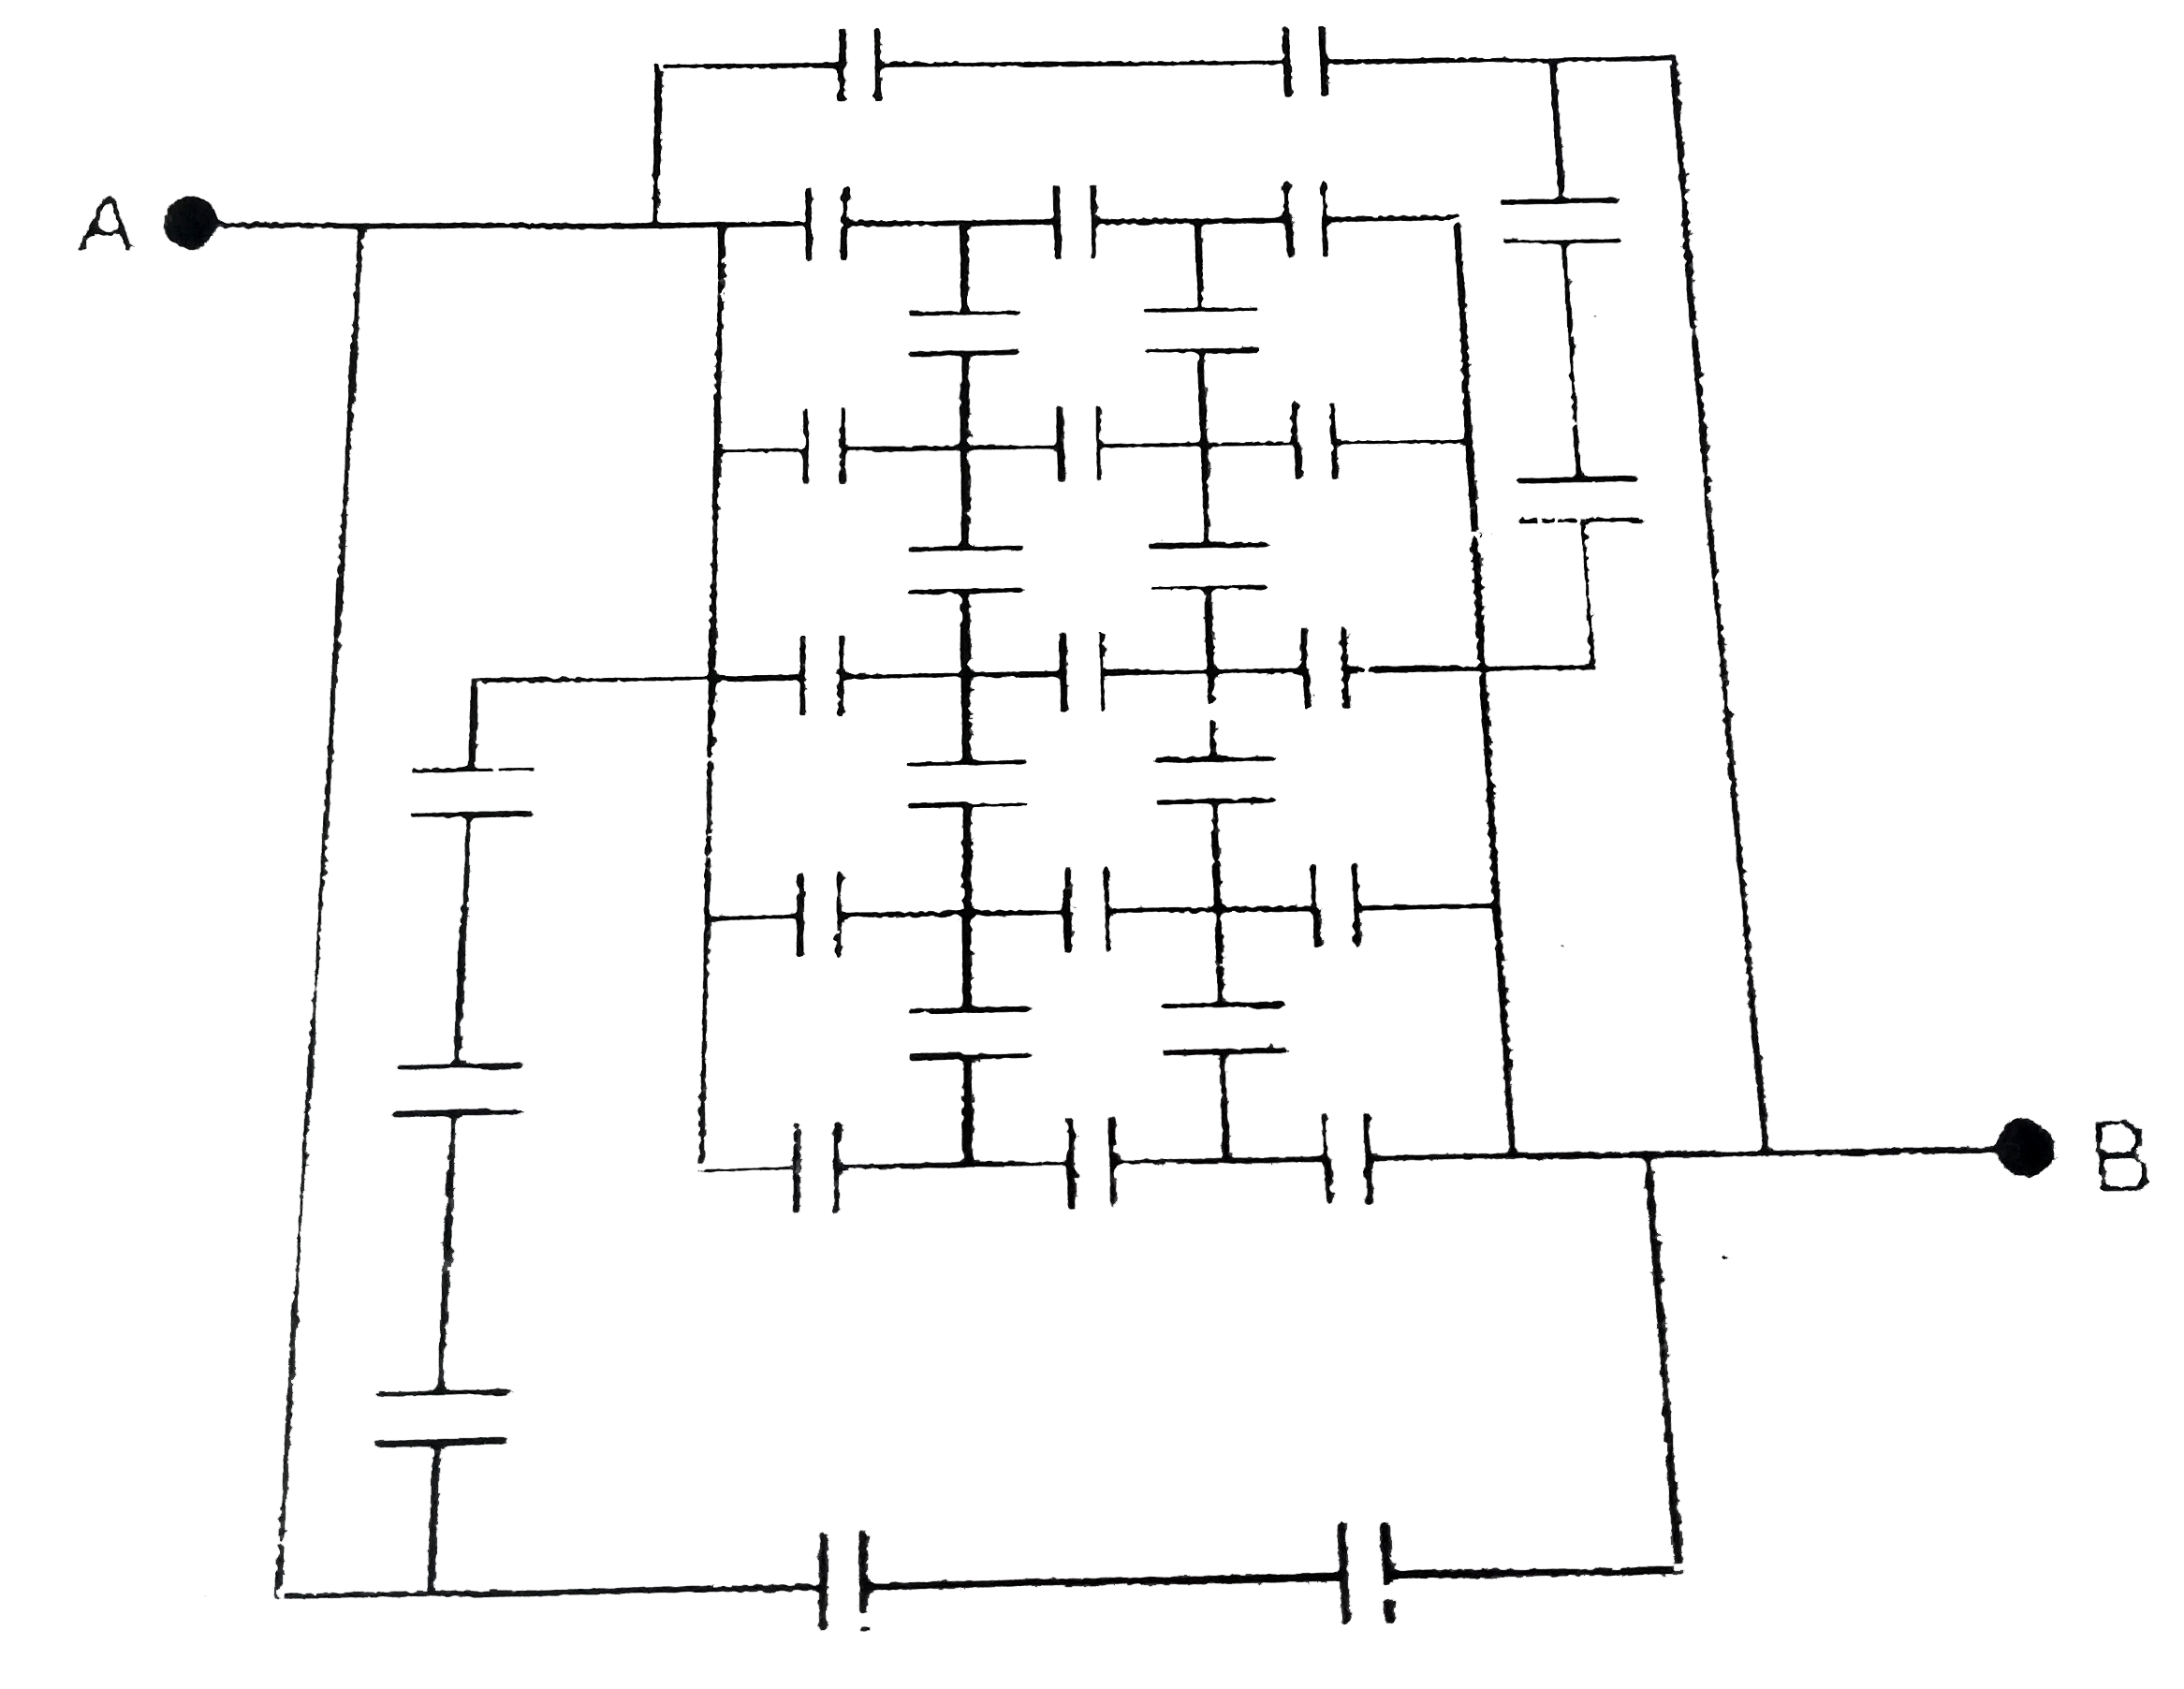 32 capacitor are connected in a circuit as shown in the figure. The capacitance of each capacitor is 3muF. Find equivalent capacitance across AB in muF.